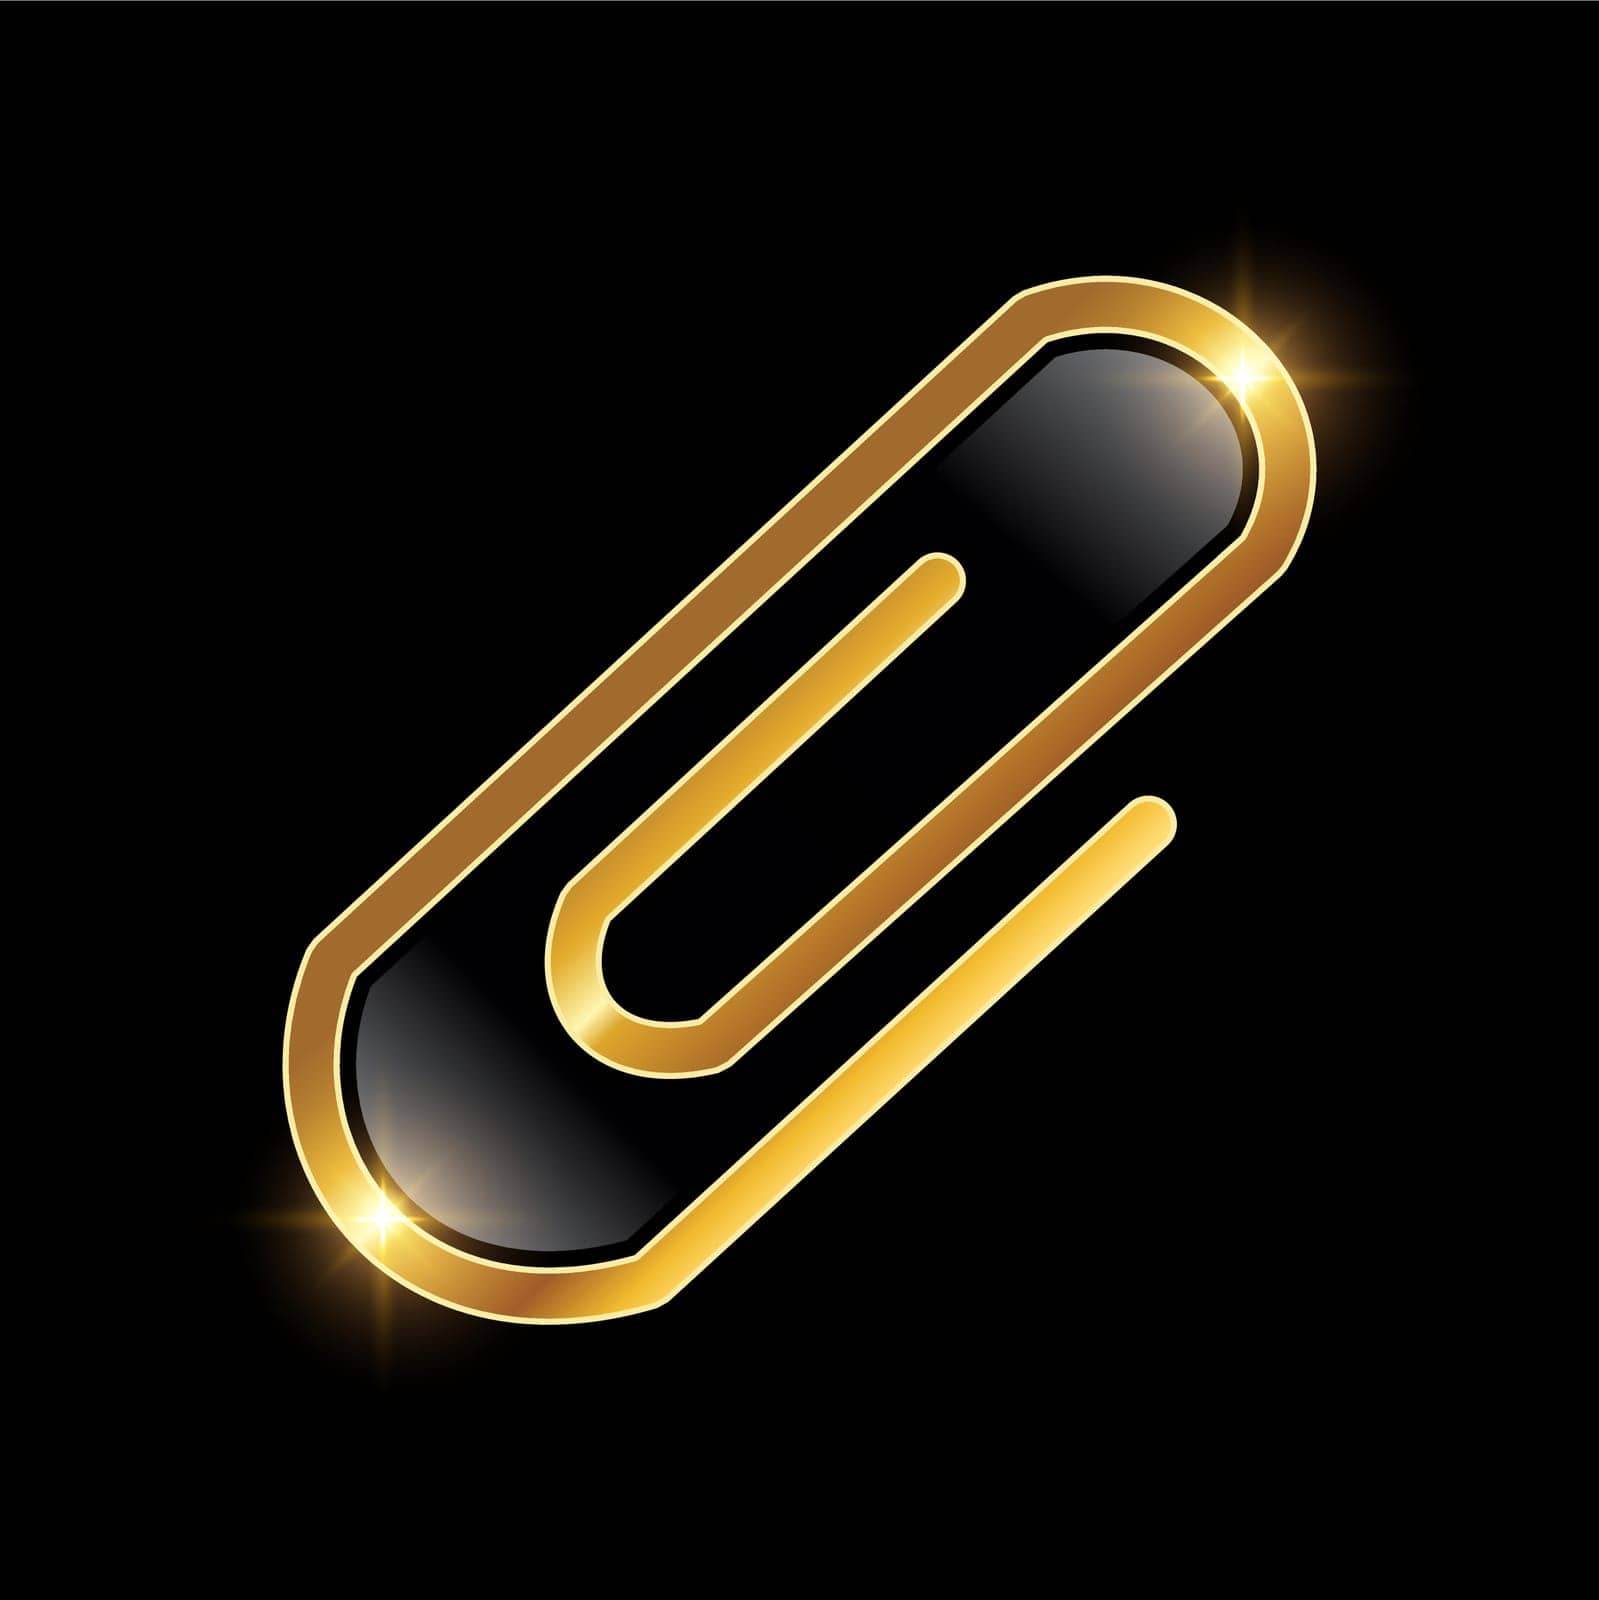 A vector Illustration of Golden Paper Clip Vector Icon in black background with gold shine effect